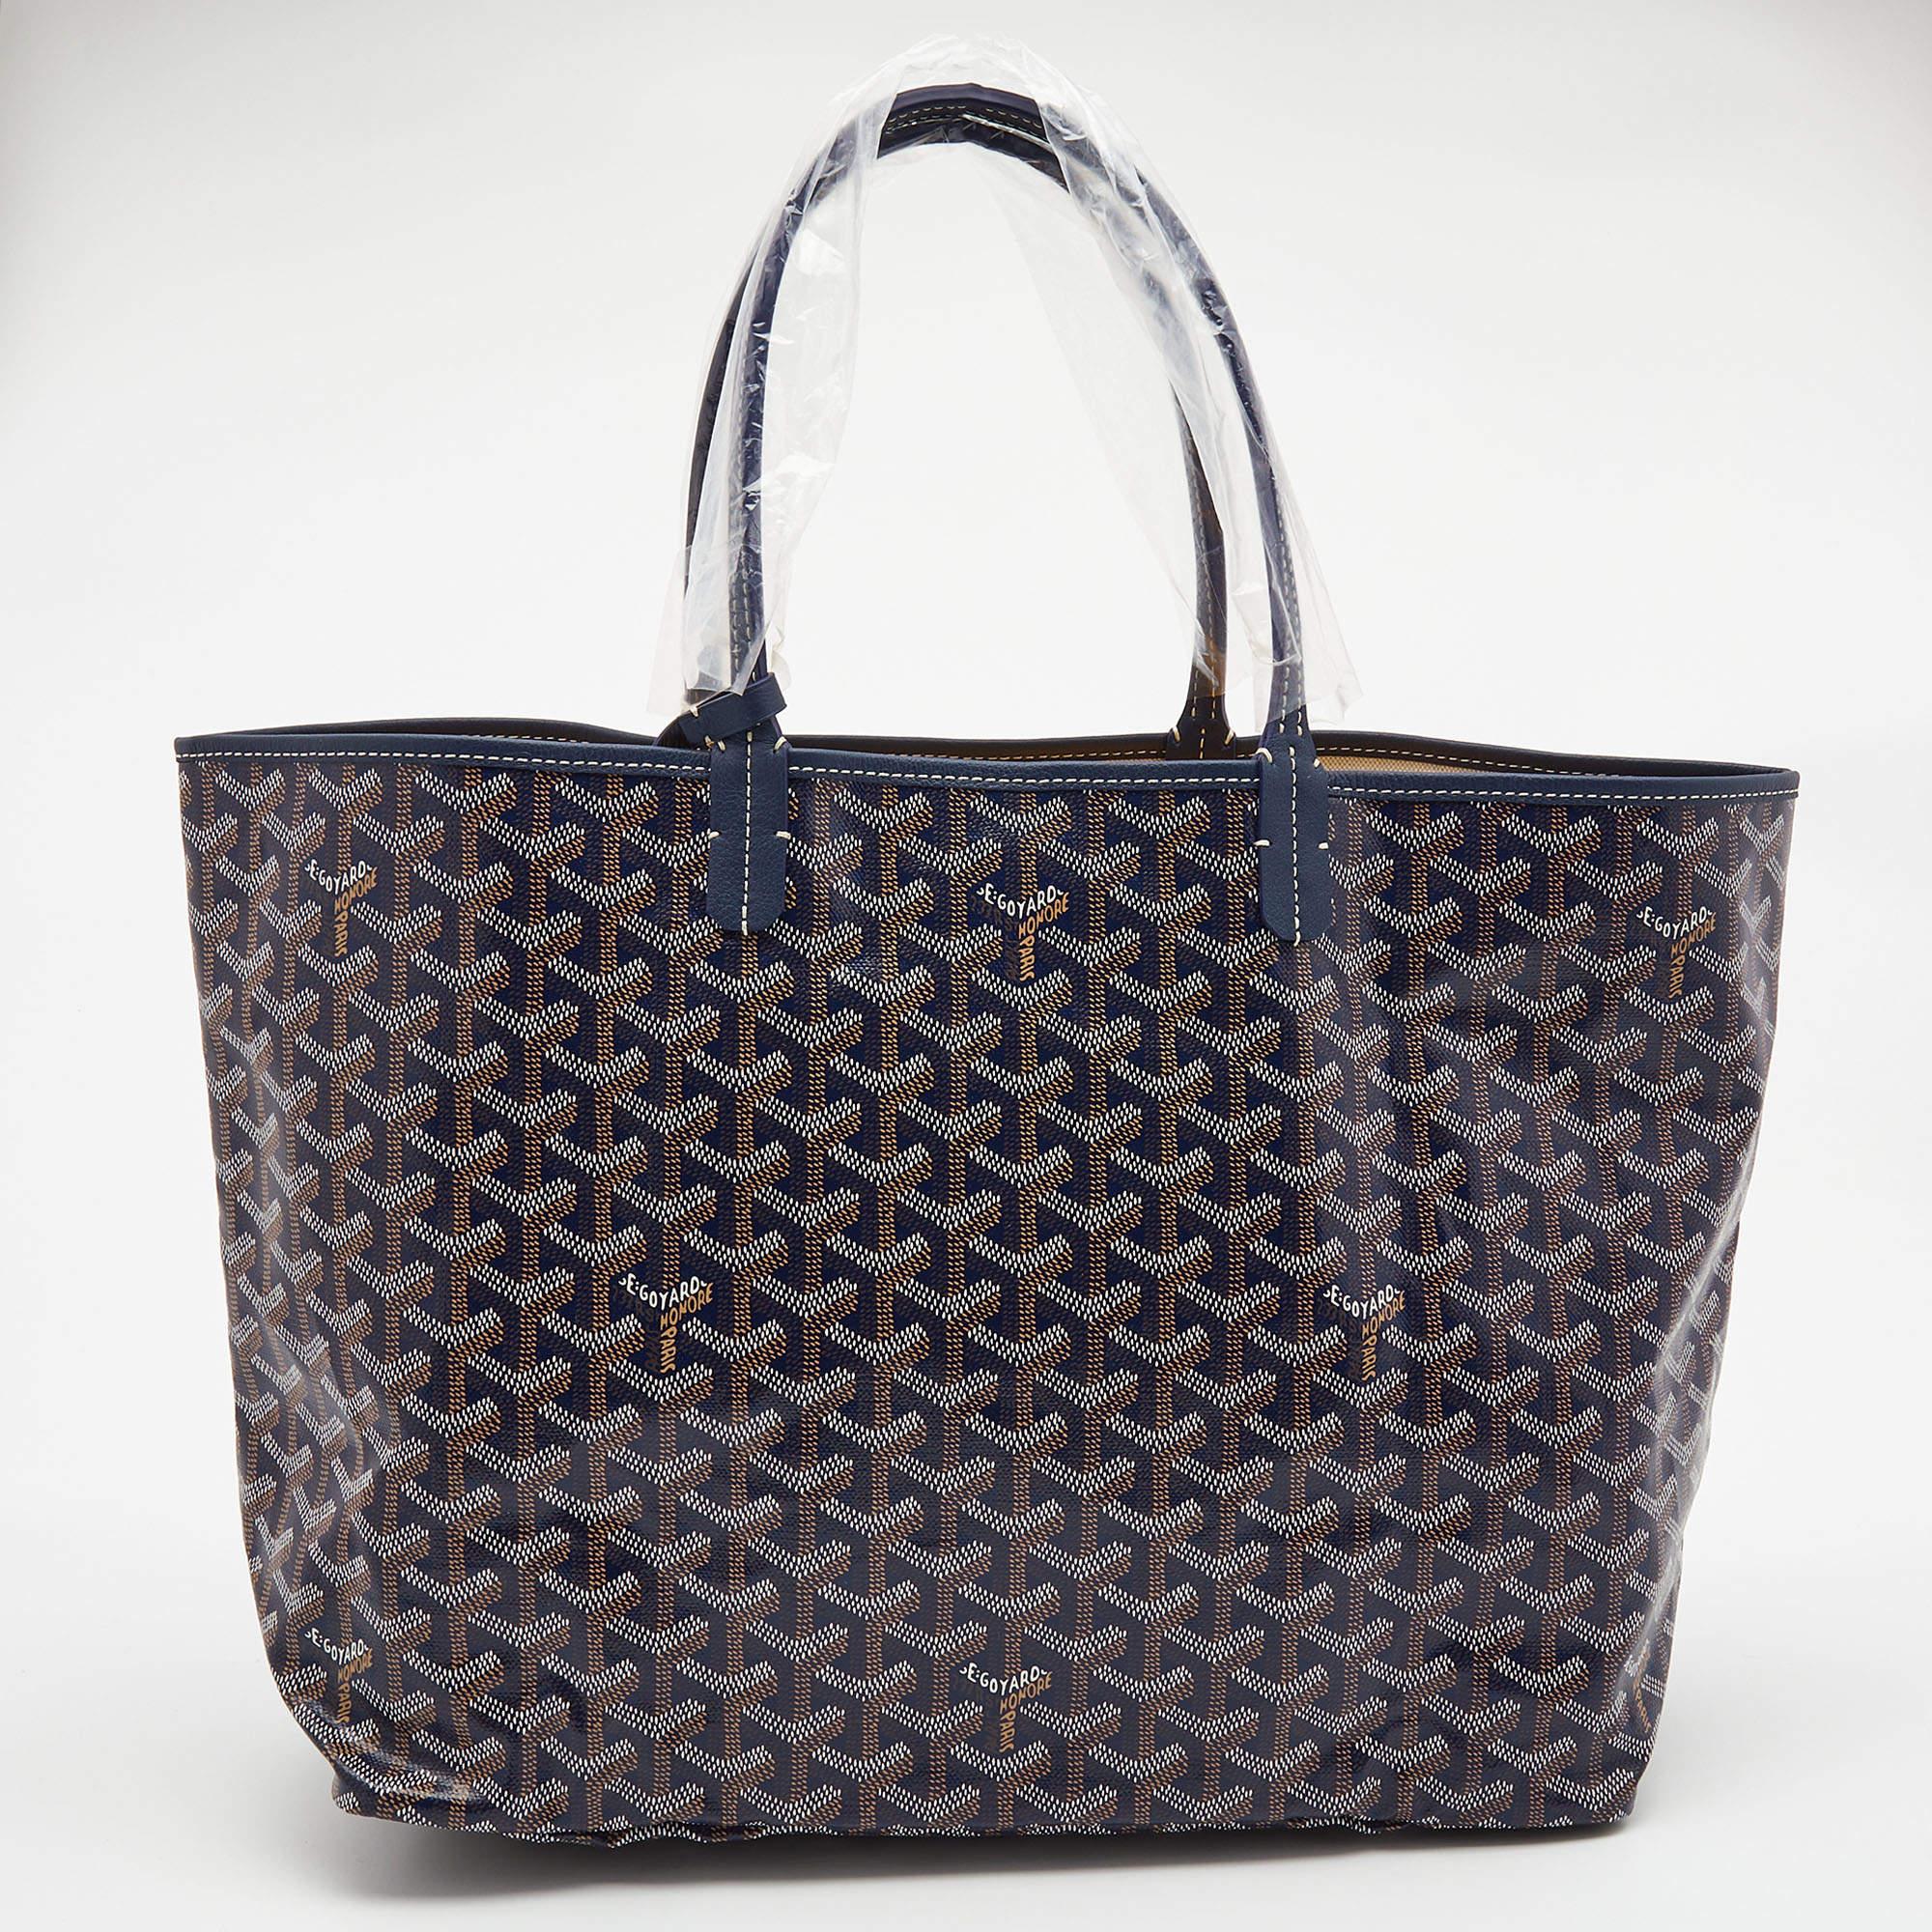 A charming creation by Goyard, this Saint Louis tote is the result of impeccable construction and artistic design. It is created from the signature Goyardine-coated canvas and leather into a versatile silhouette. With a perfect combination of